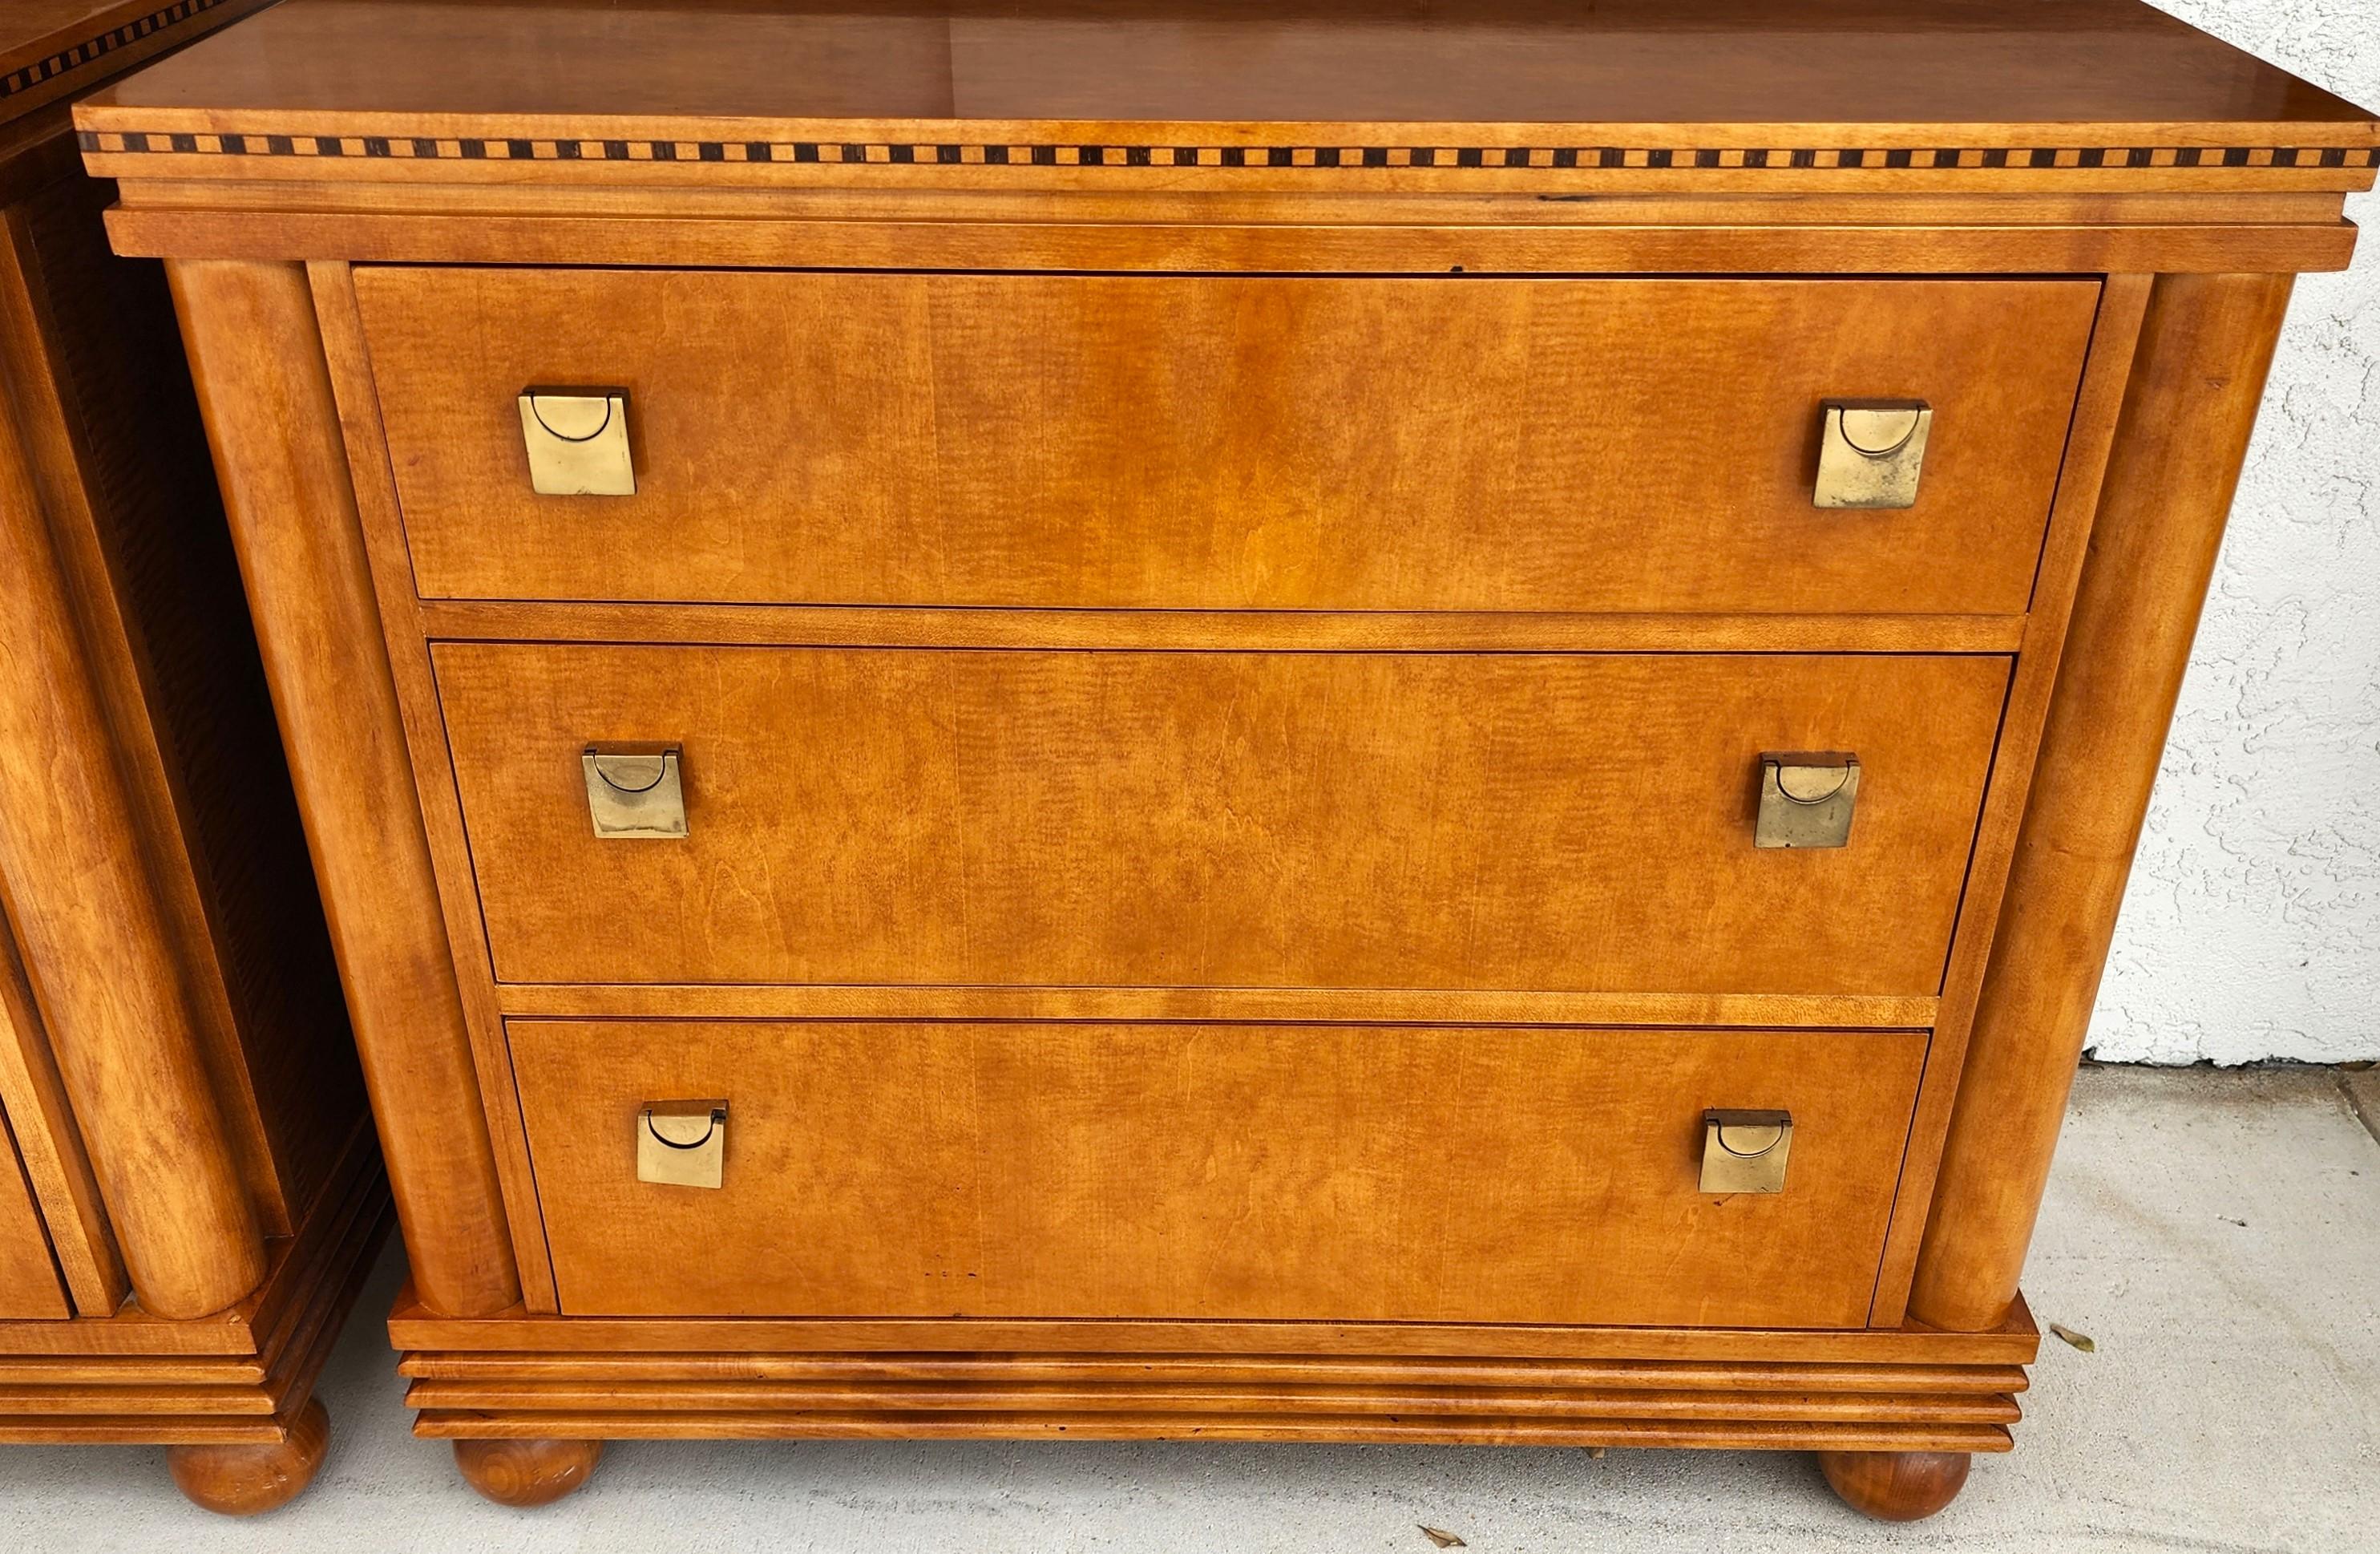 For FULL item description click on CONTINUE READING at the bottom of this page.

Offering One Of Our Recent Palm Beach Estate Fine Furniture Acquisitions Of A
Pair of High-Quality American Made Hickory White 'Genesis' Collection Biedermeier Style